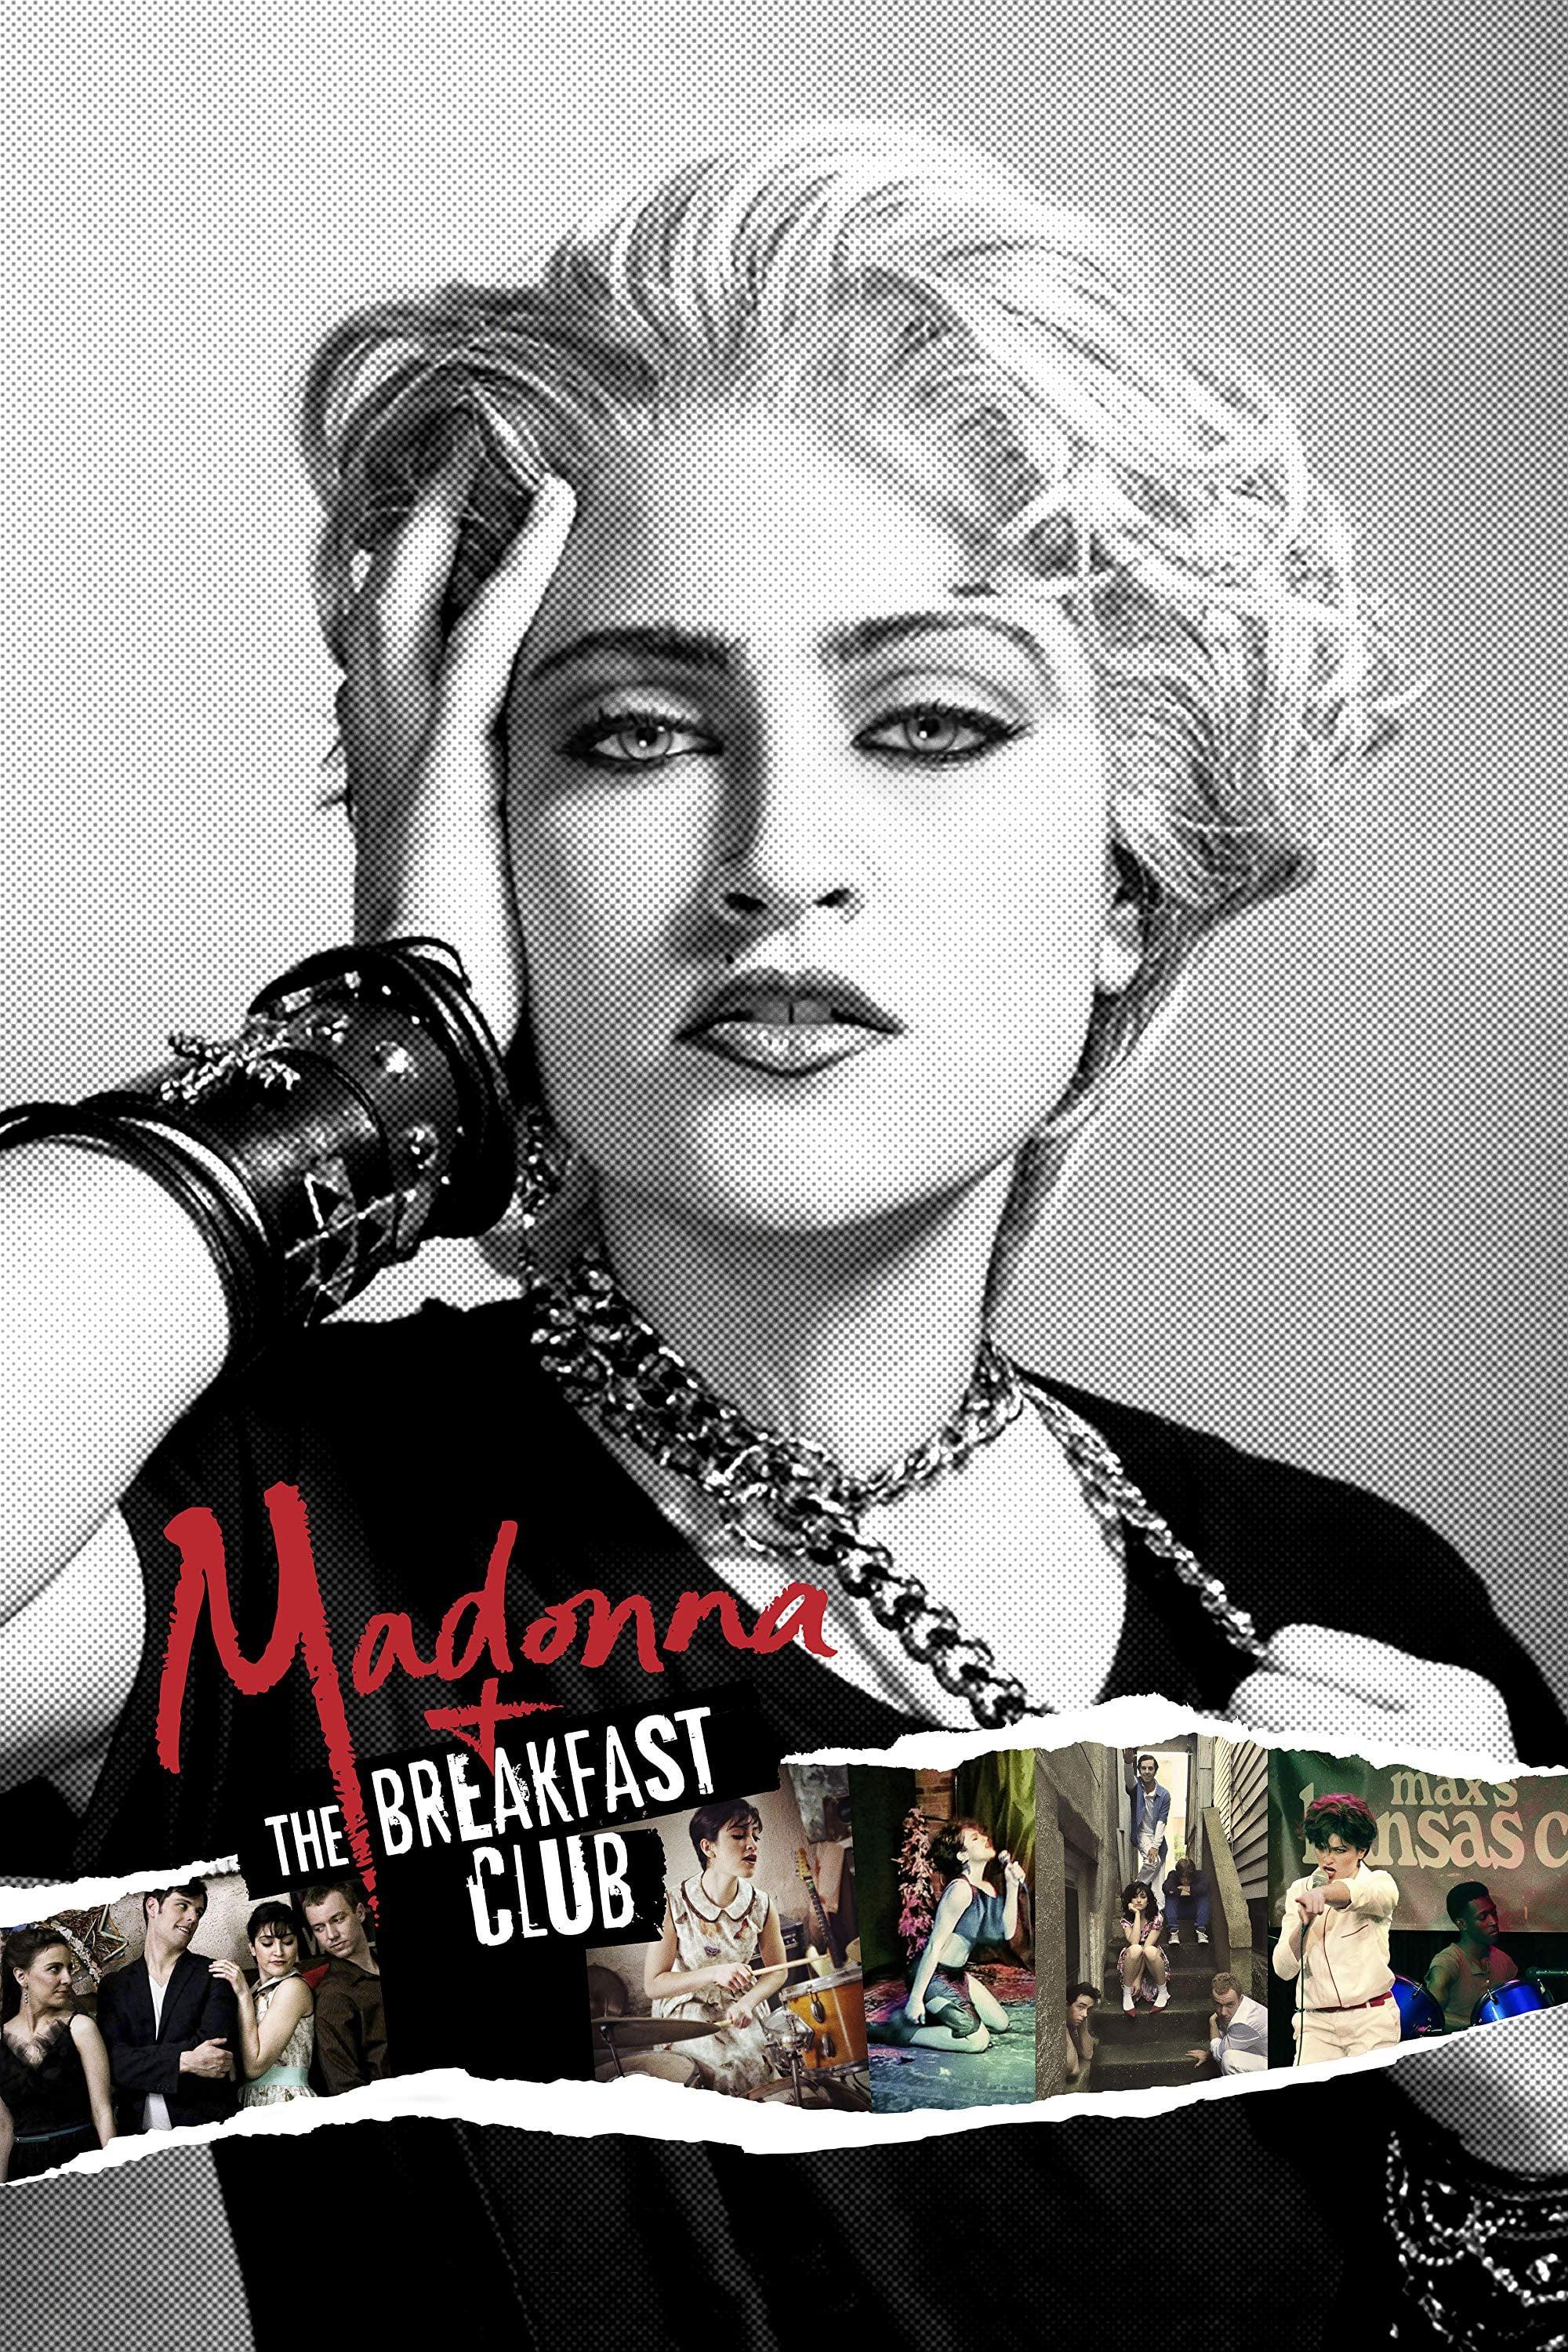 Madonna and the Breakfast Club poster